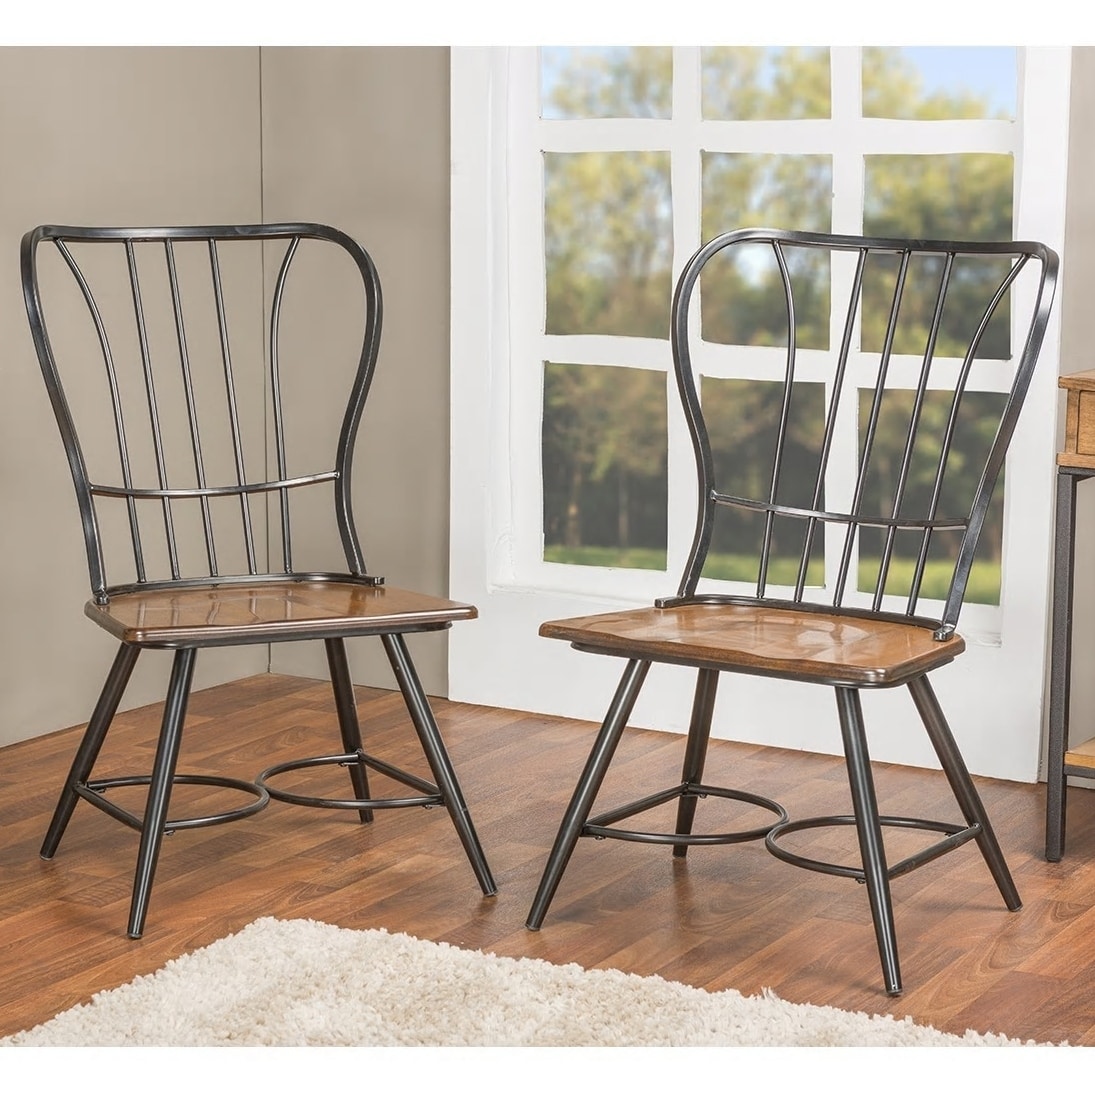 Featured image of post Industrial Wood And Metal Dining Chairs - Many chairs come in dining sets of 4, and we also include some of our bar stool collection in this section of our website.